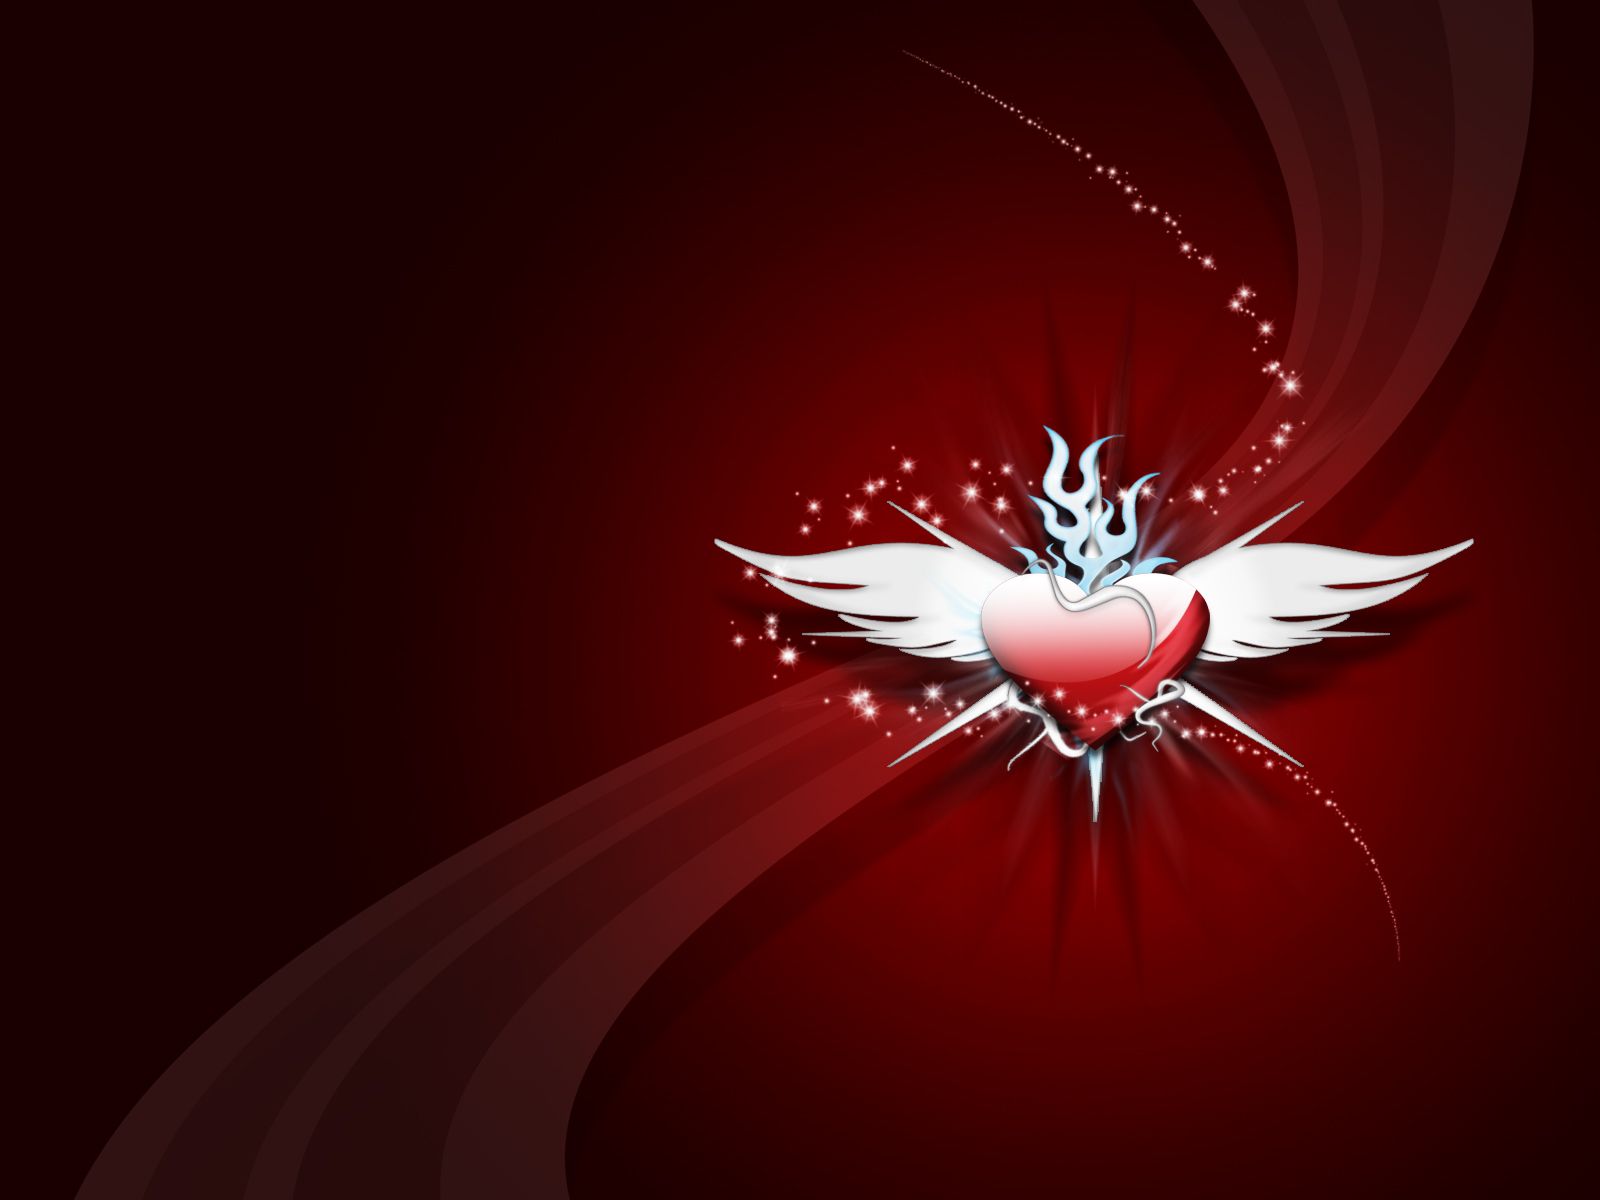 683 Love HD Wallpapers | Backgrounds - Wallpaper Abyss